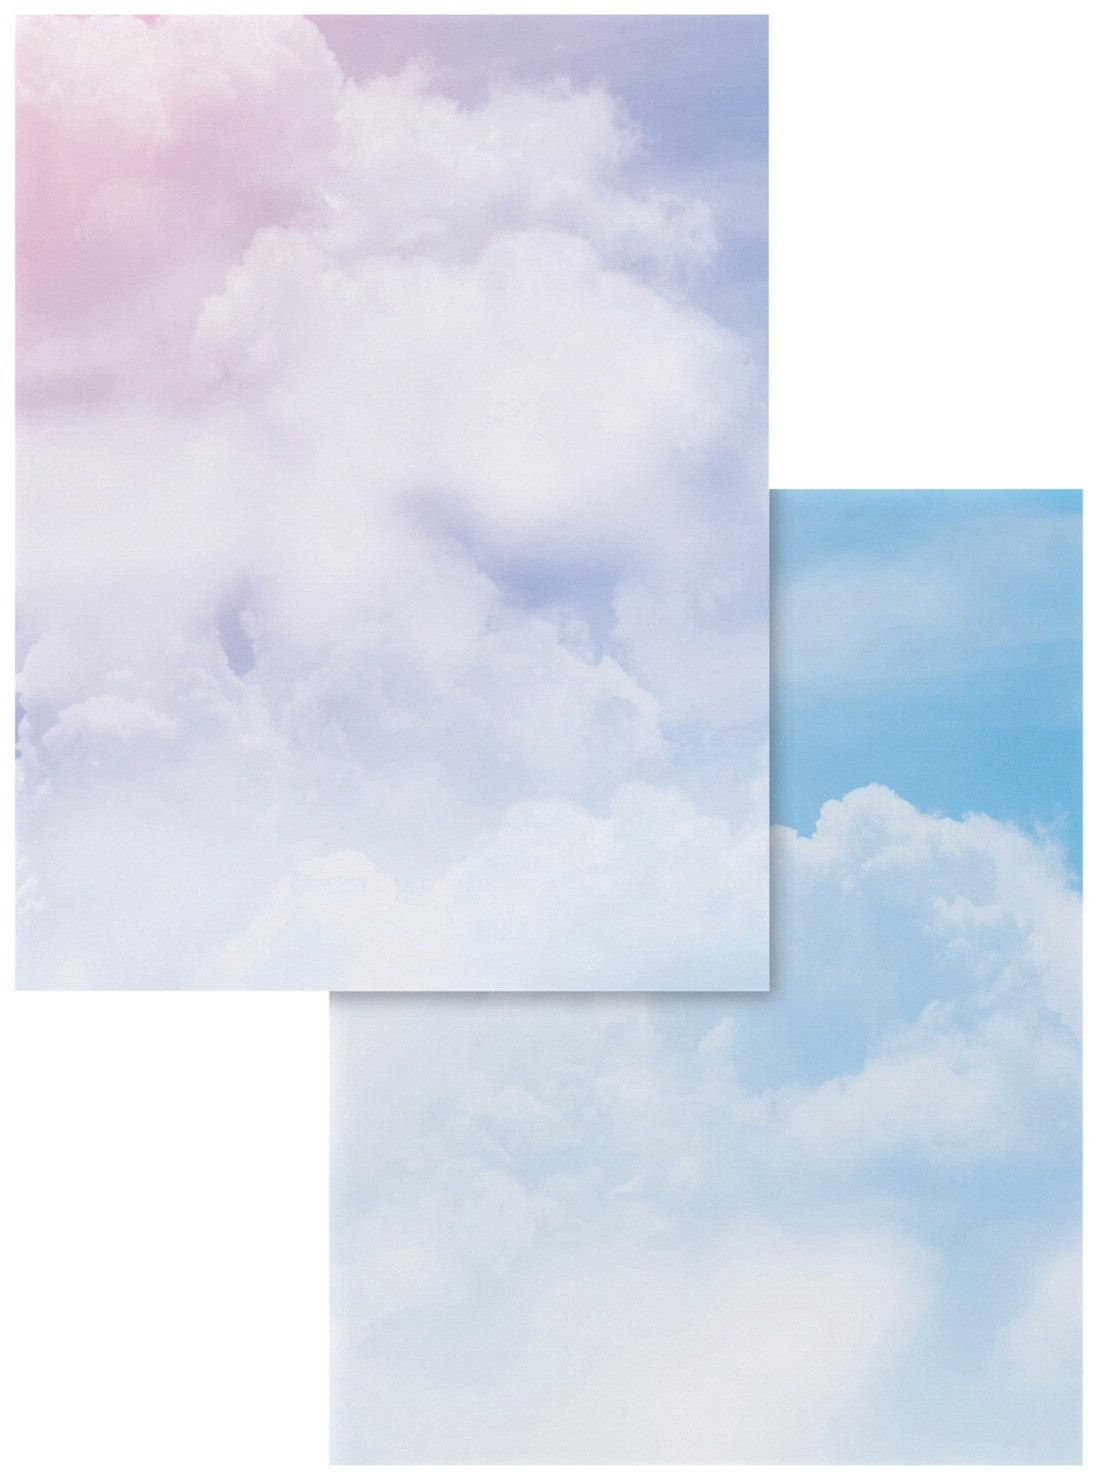 Preprinted Stationery 8-1/2 x 11 Inches, Clouds 100/pk